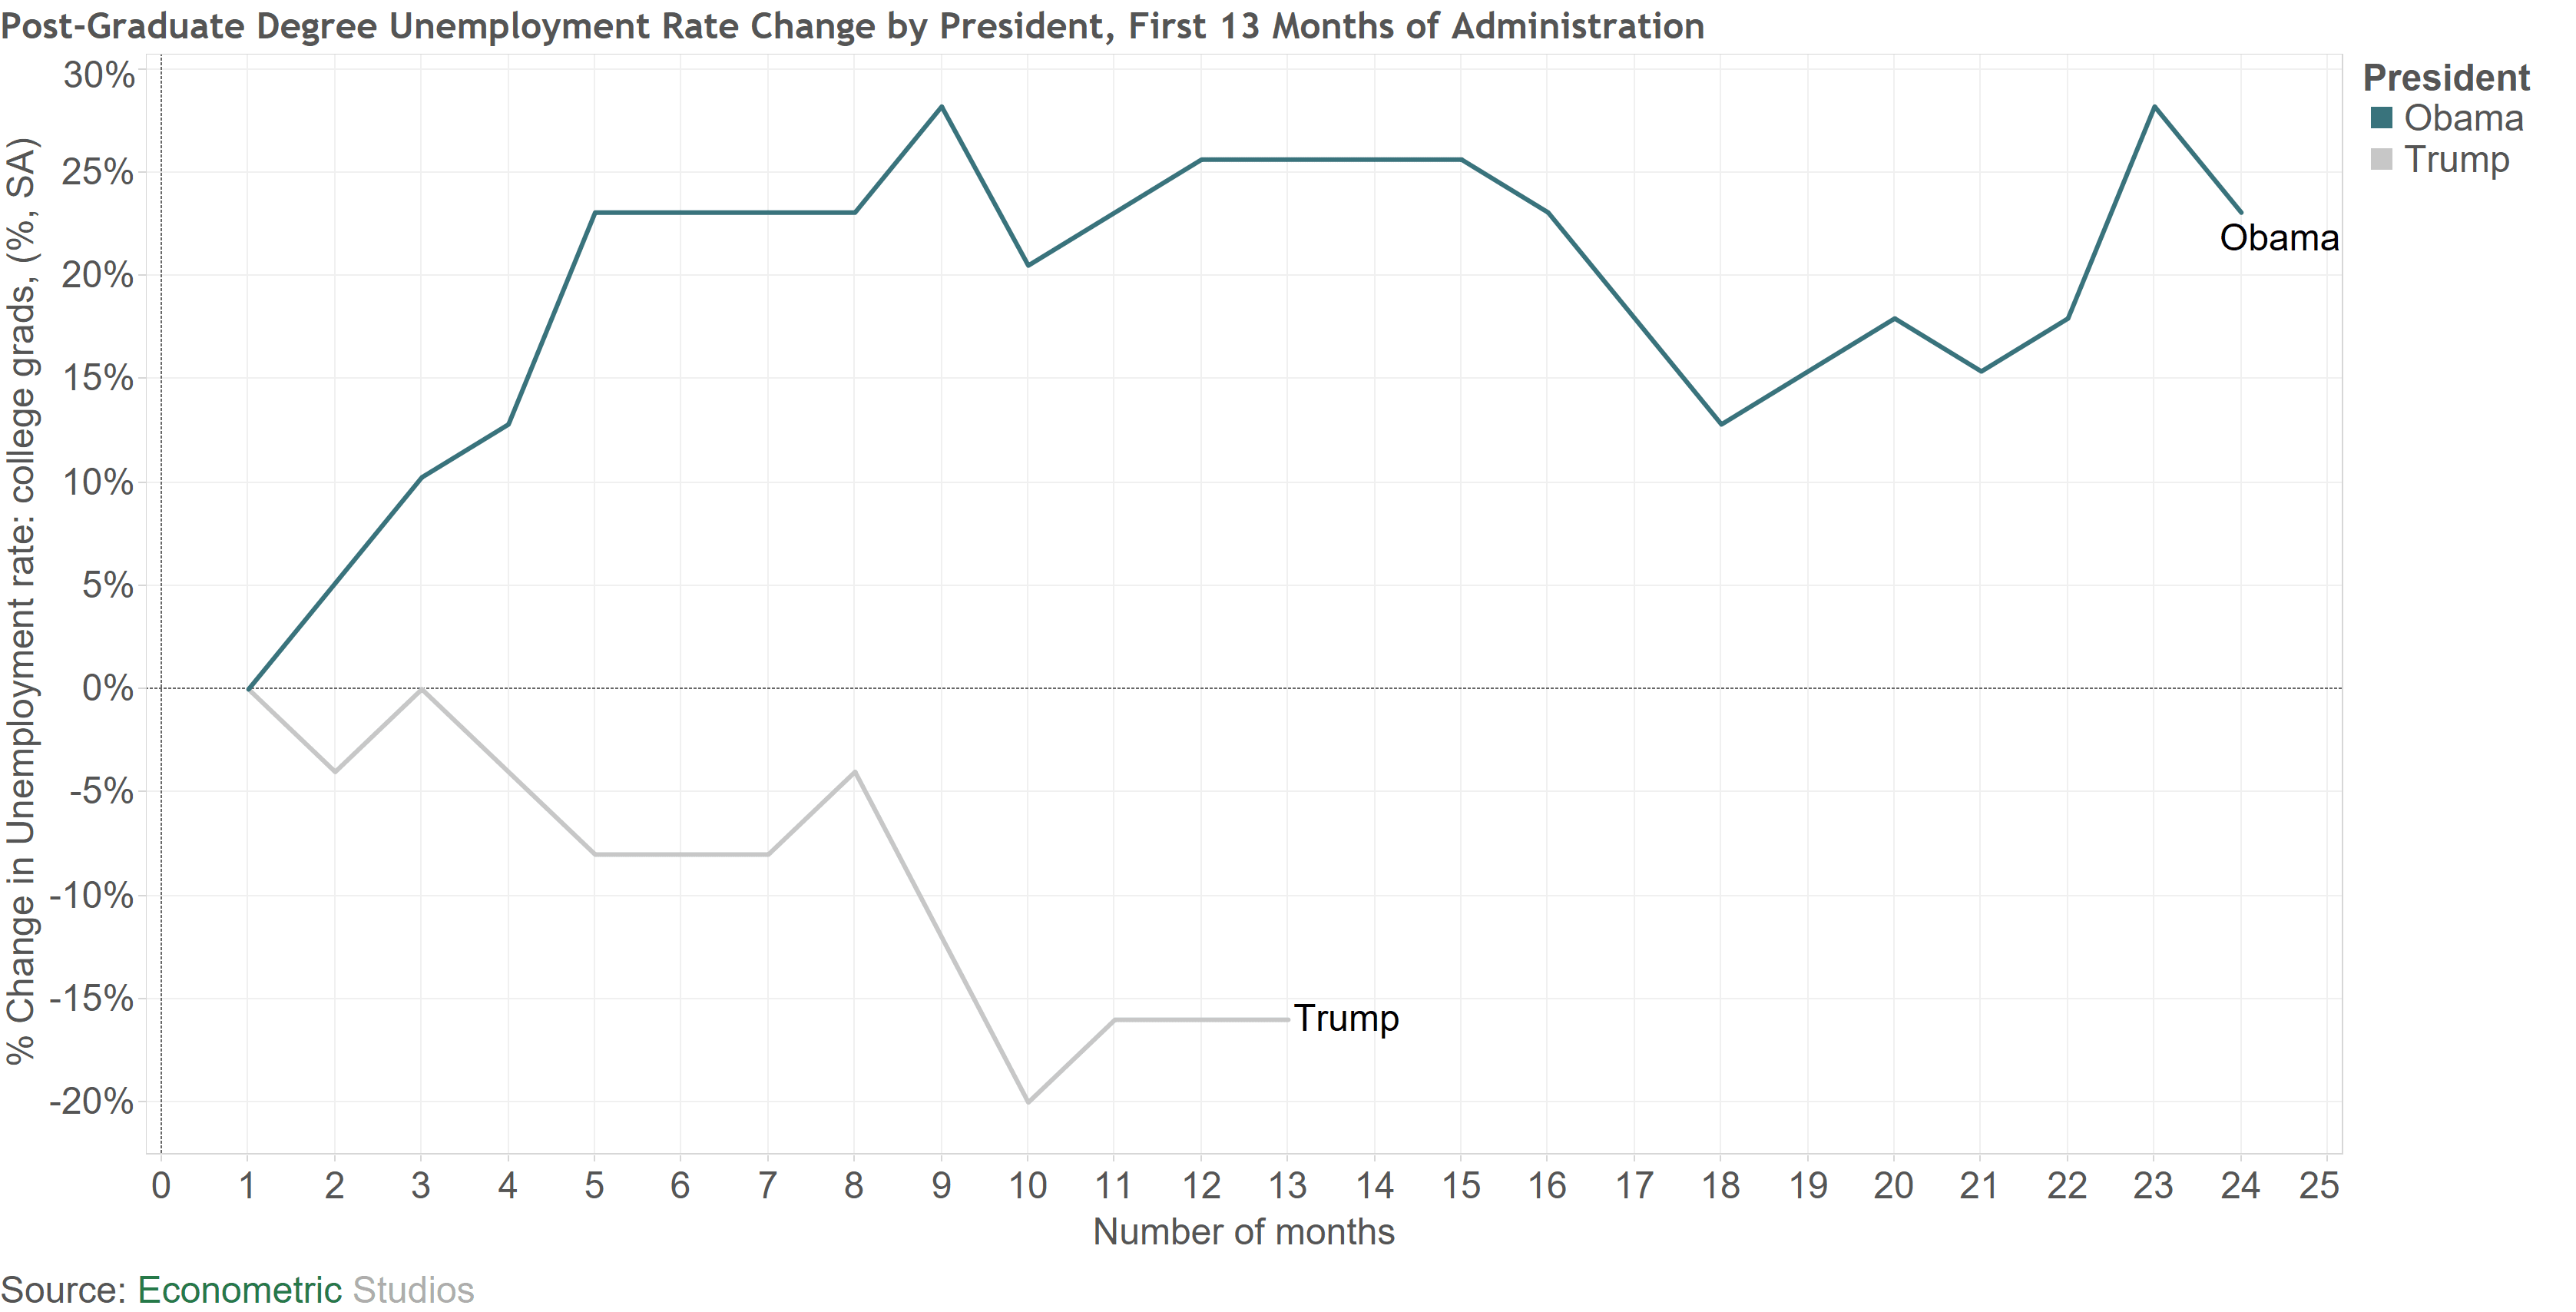 3b Post Graduate Degree Unemployment Rate Change by President First 13 Months of Administration